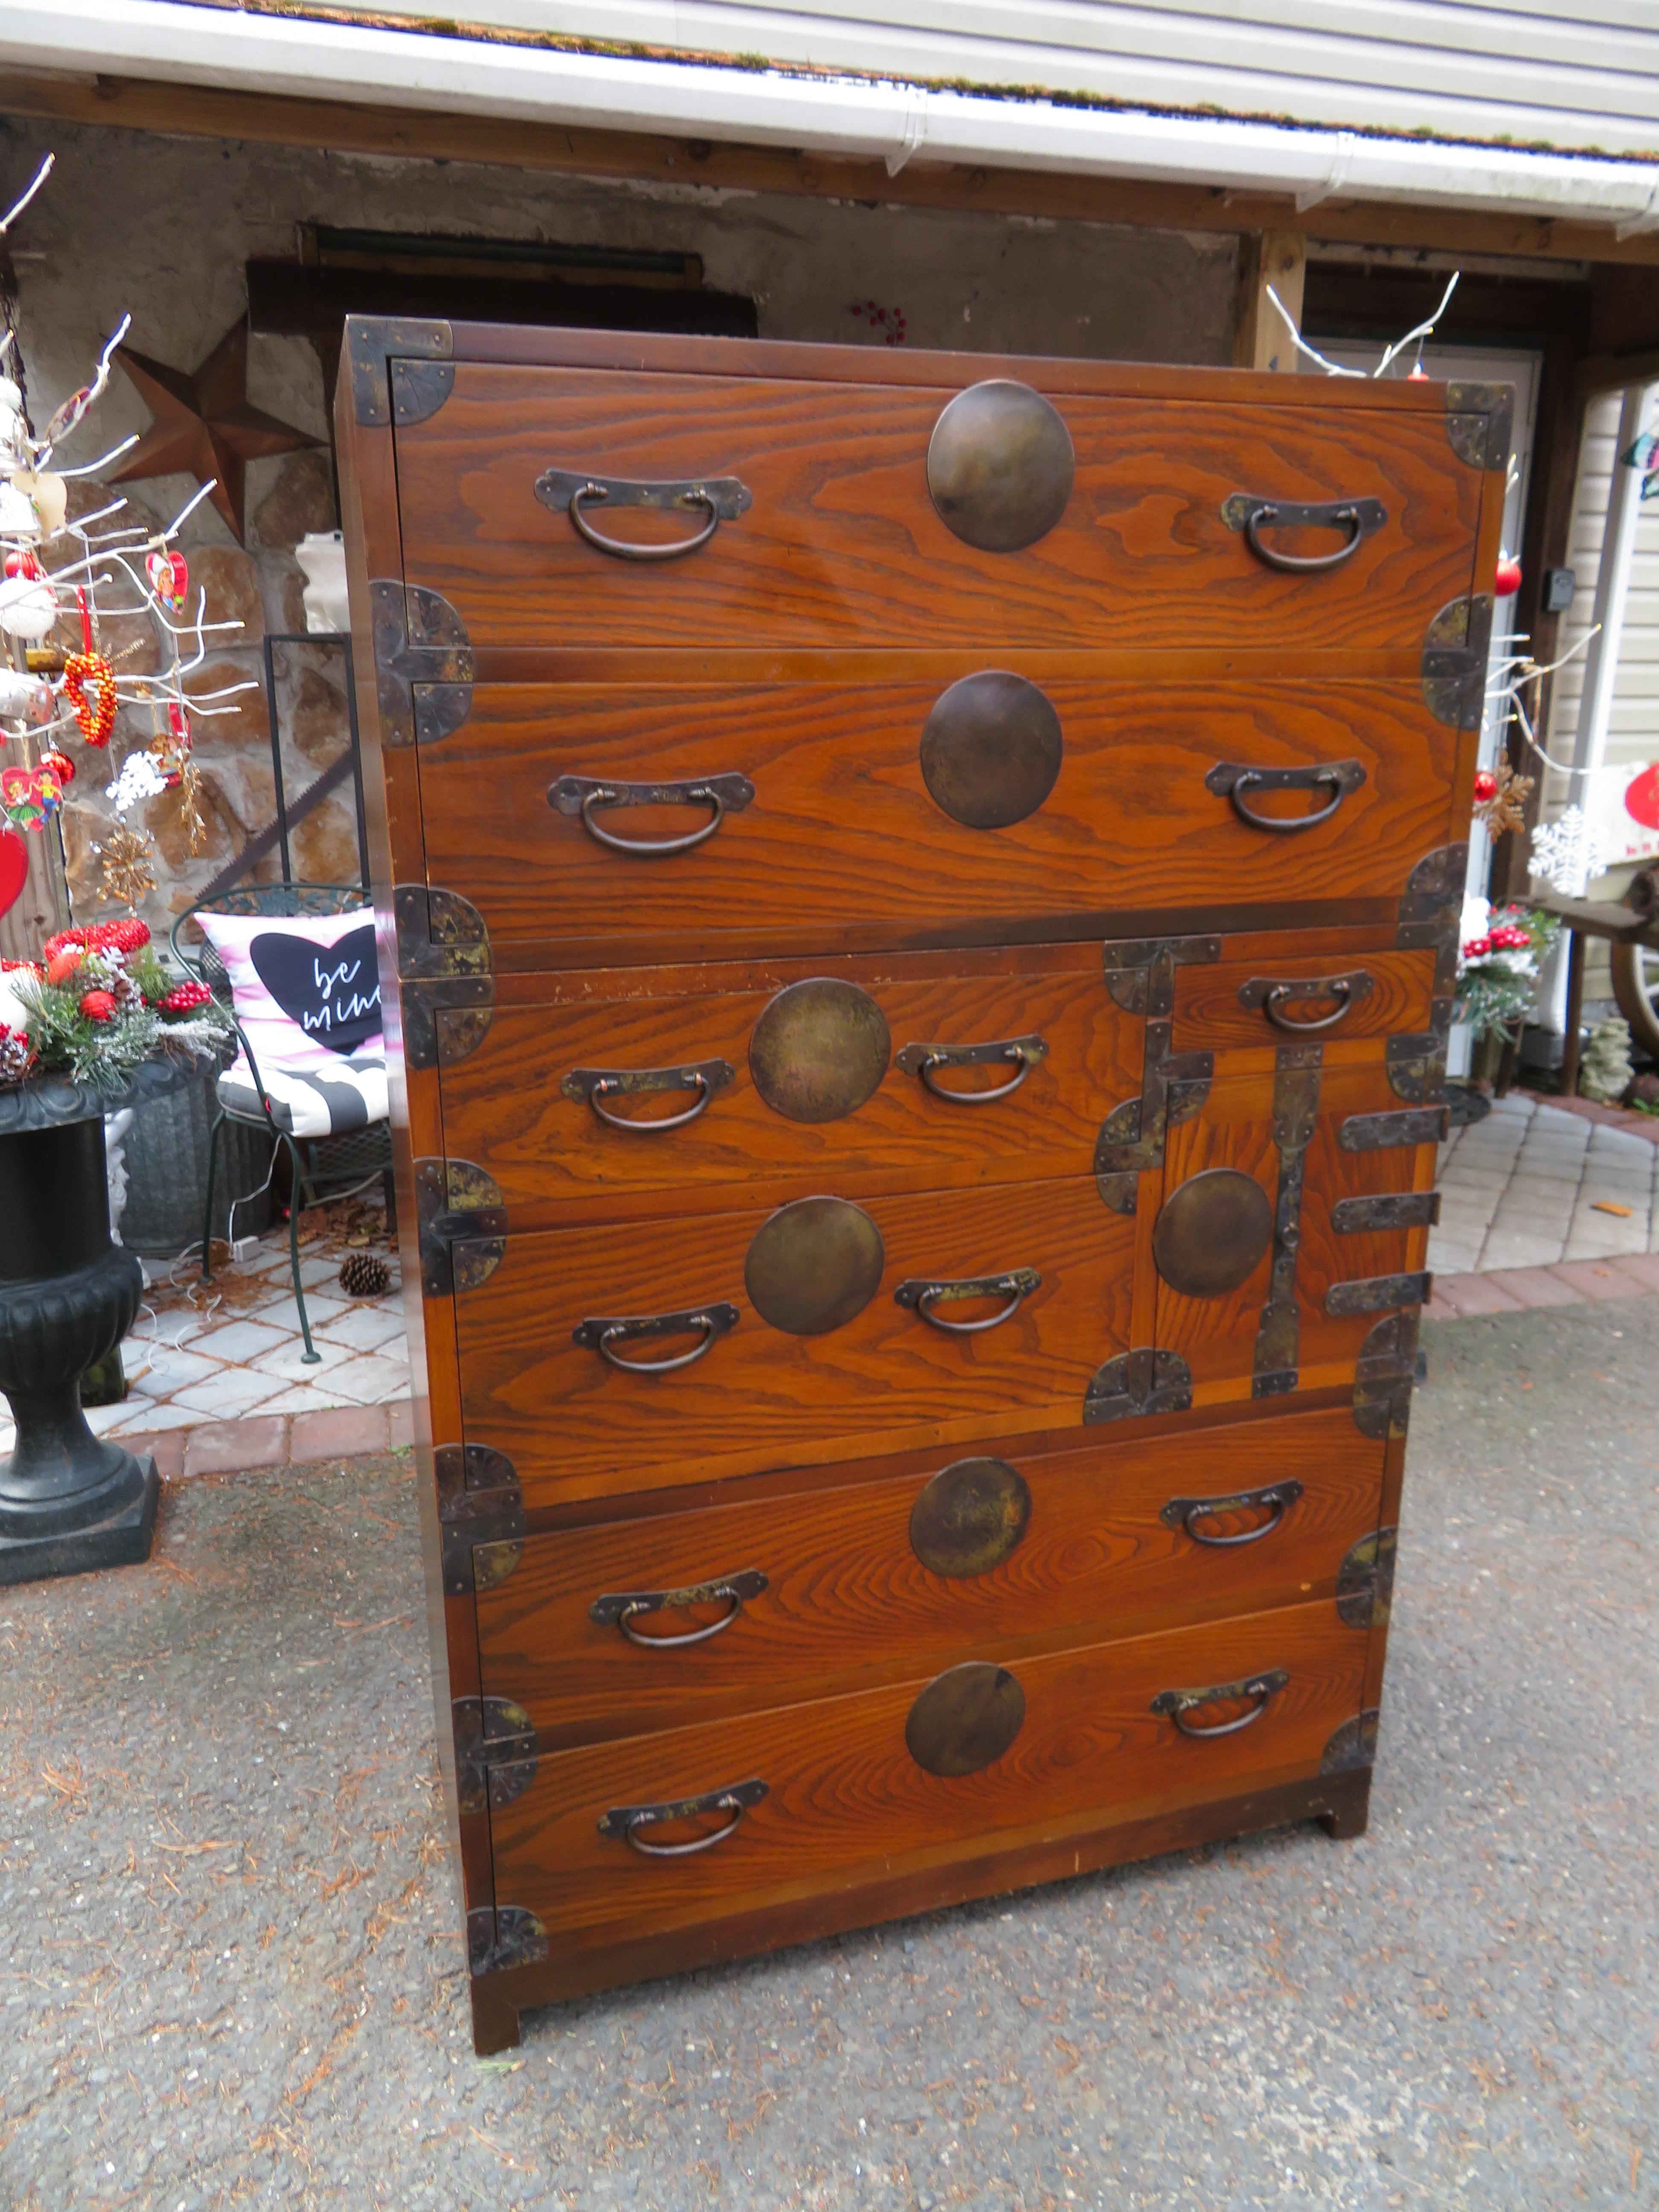 3 fabulous 20th-century Japanese-style stacking Tansu chests of drawers.
Each section can be used separately for versatility or stacked together to save space. 
Originally used to store Japanese kimonos, obi and accessories, its present-day use